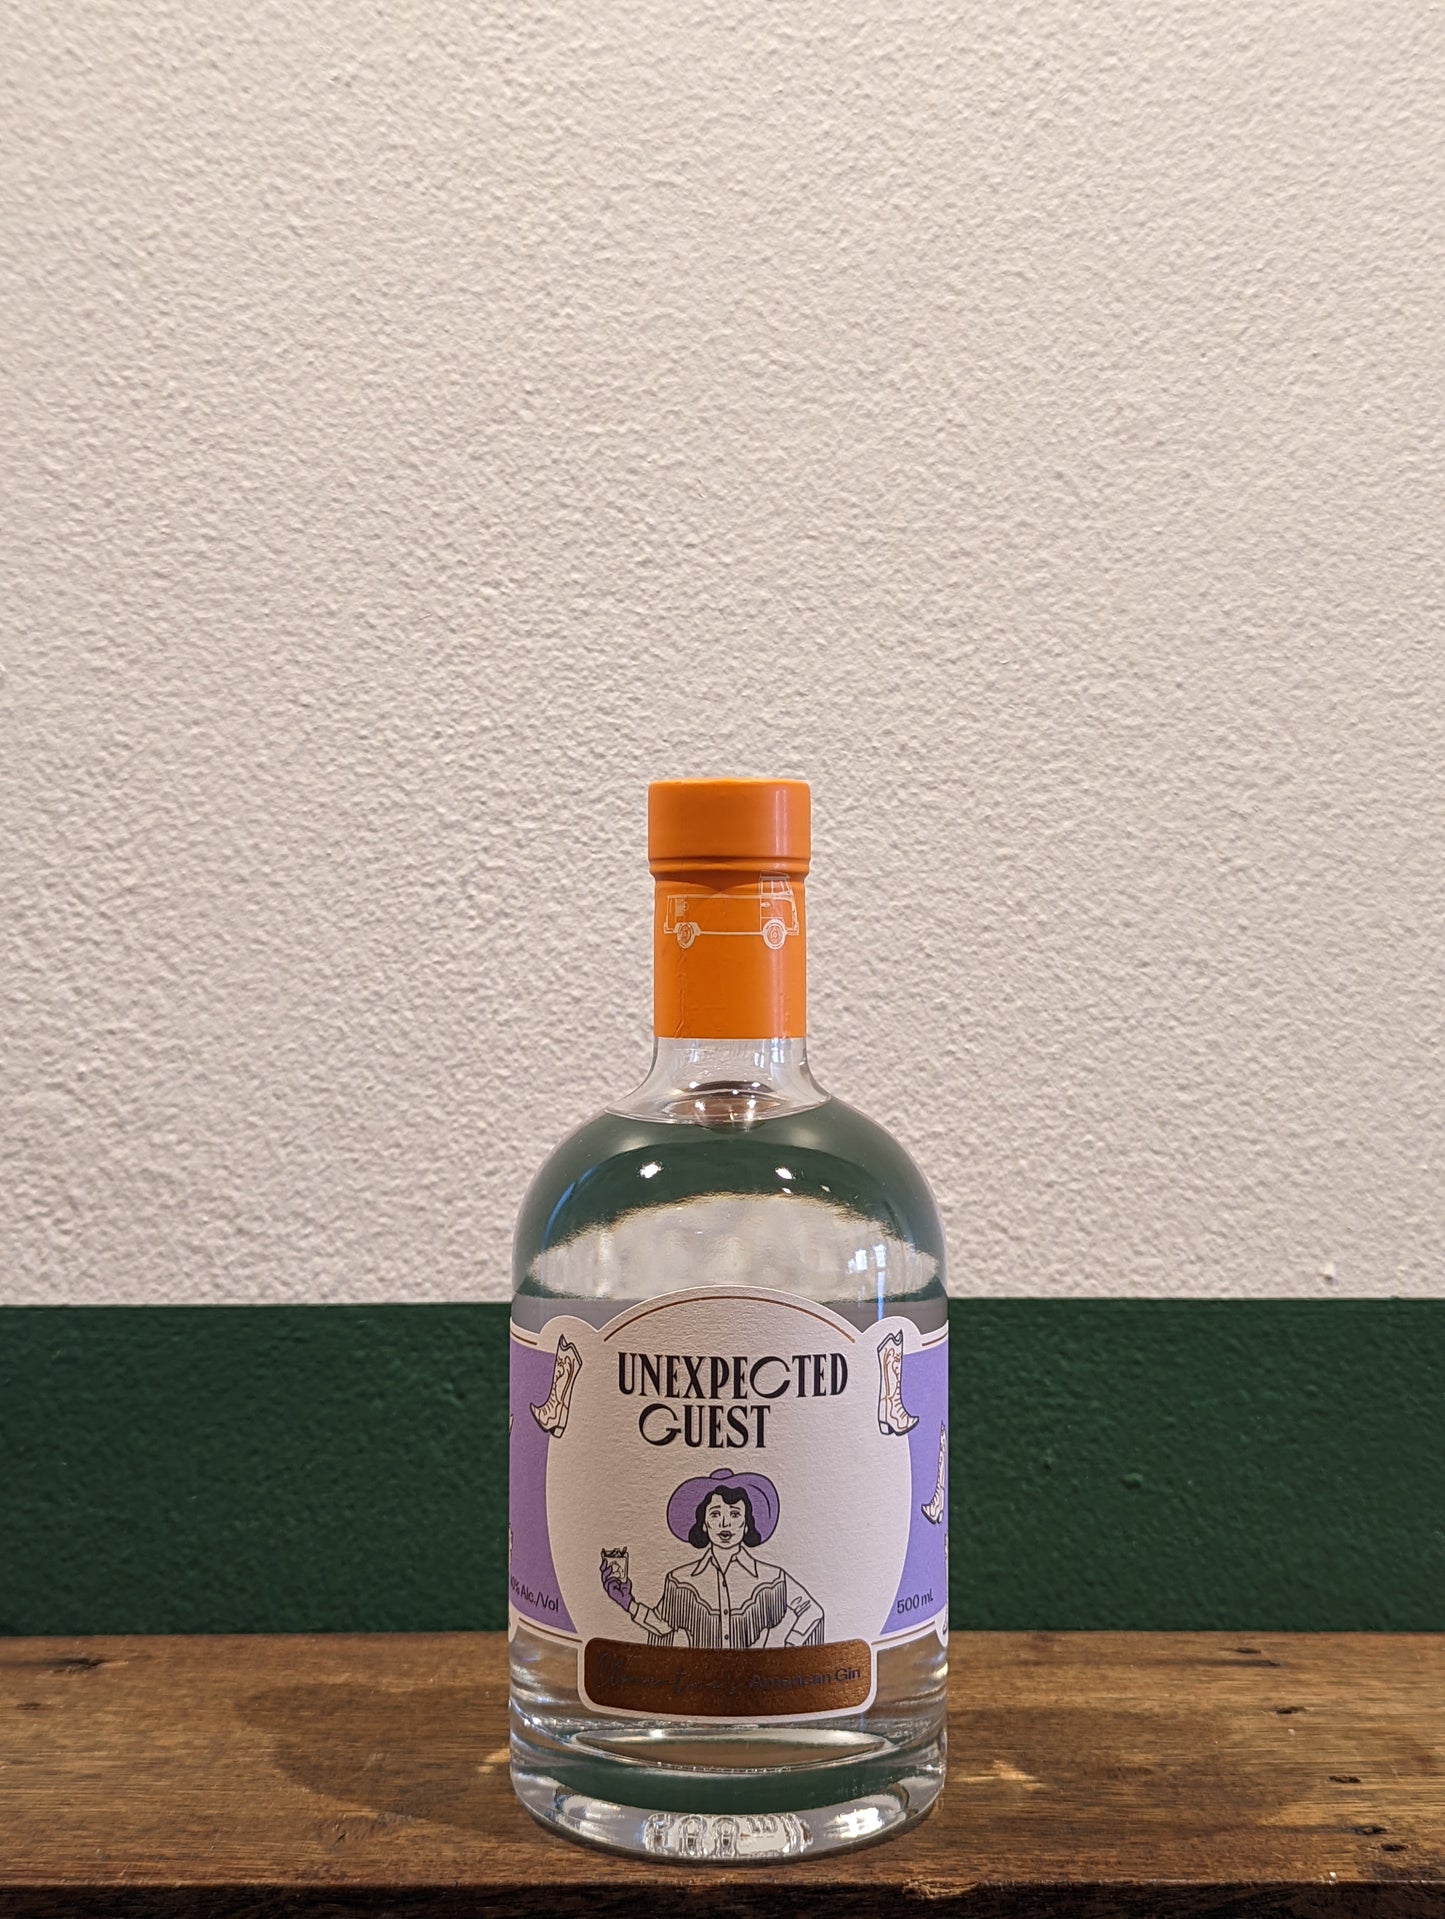 Unexpected Guest - Clementine's American Gin